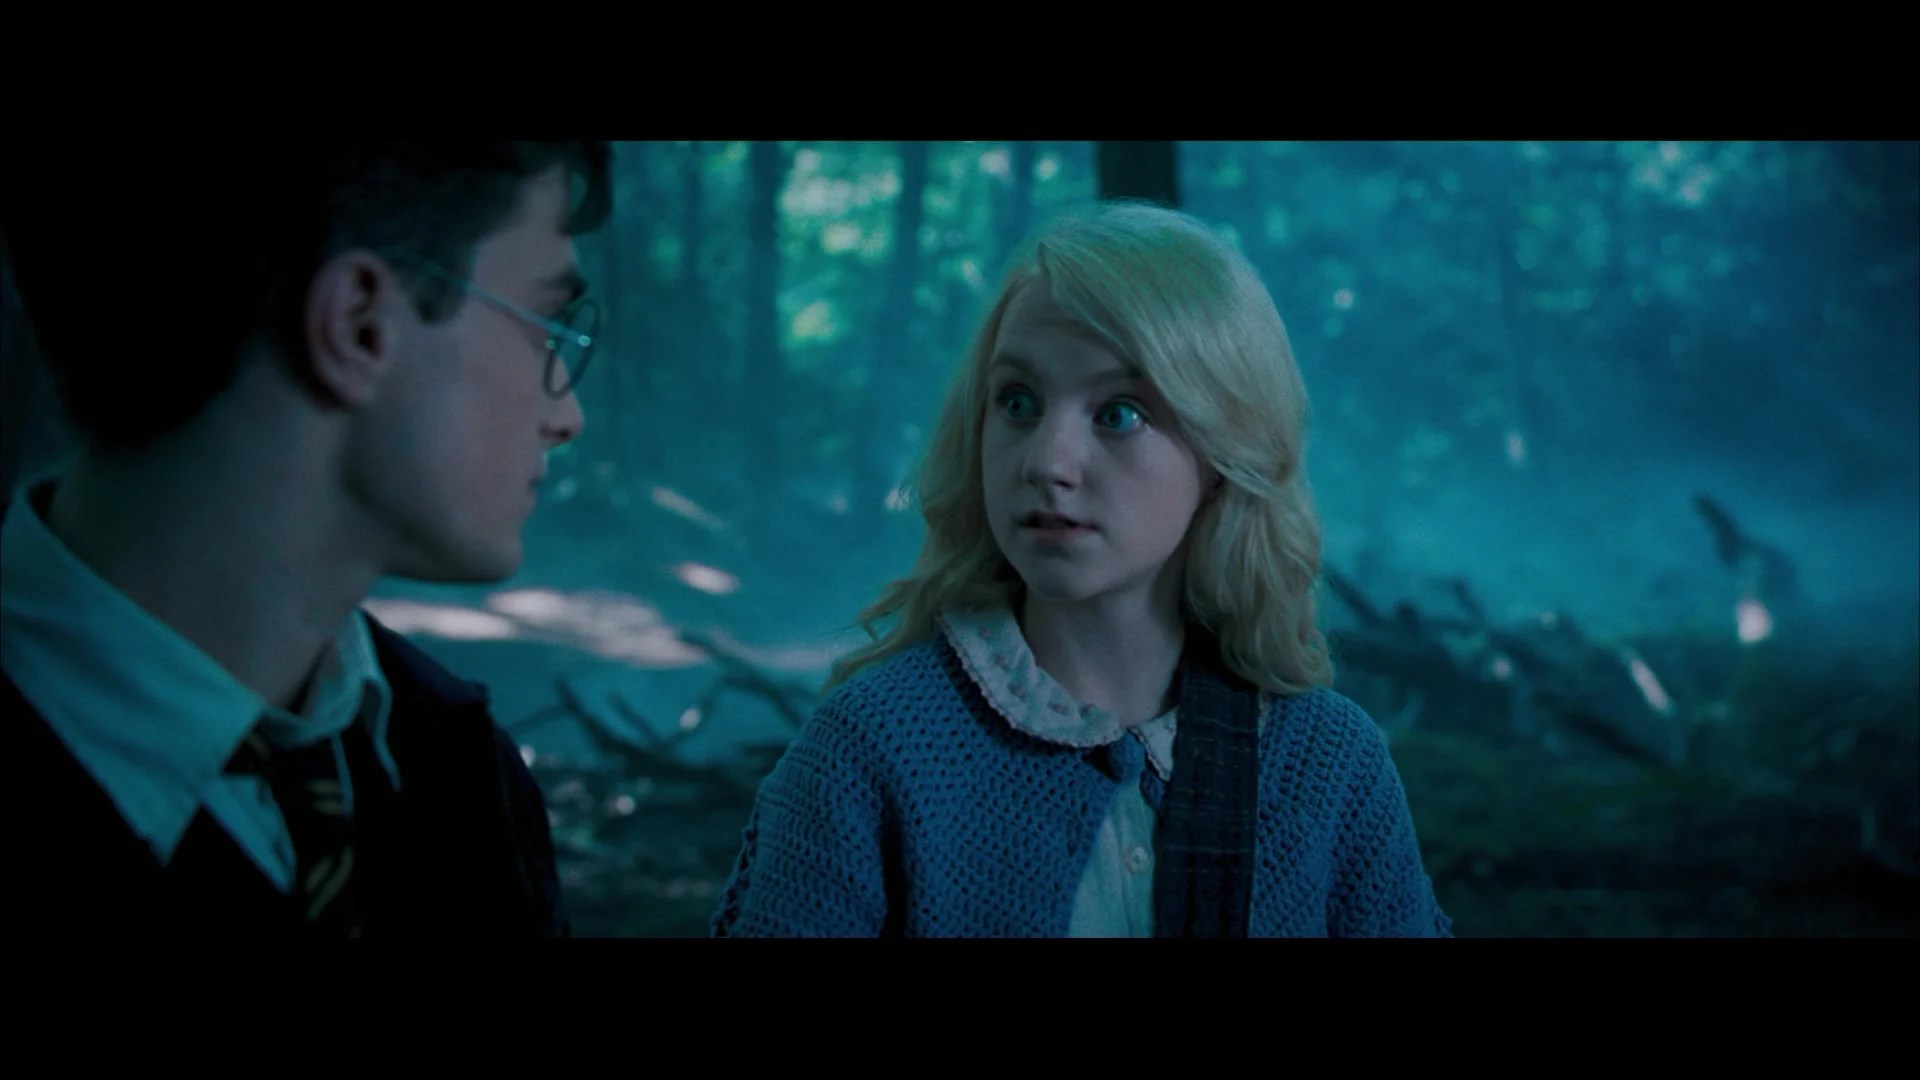 Harry Potter (Daniel Radcliffe) stumbles upon Luna Lovegood (Evanna Lynch) communing with a Thestral in Harry Potter and the Order of the Phoenix (2007), Warner Bros. Pictures